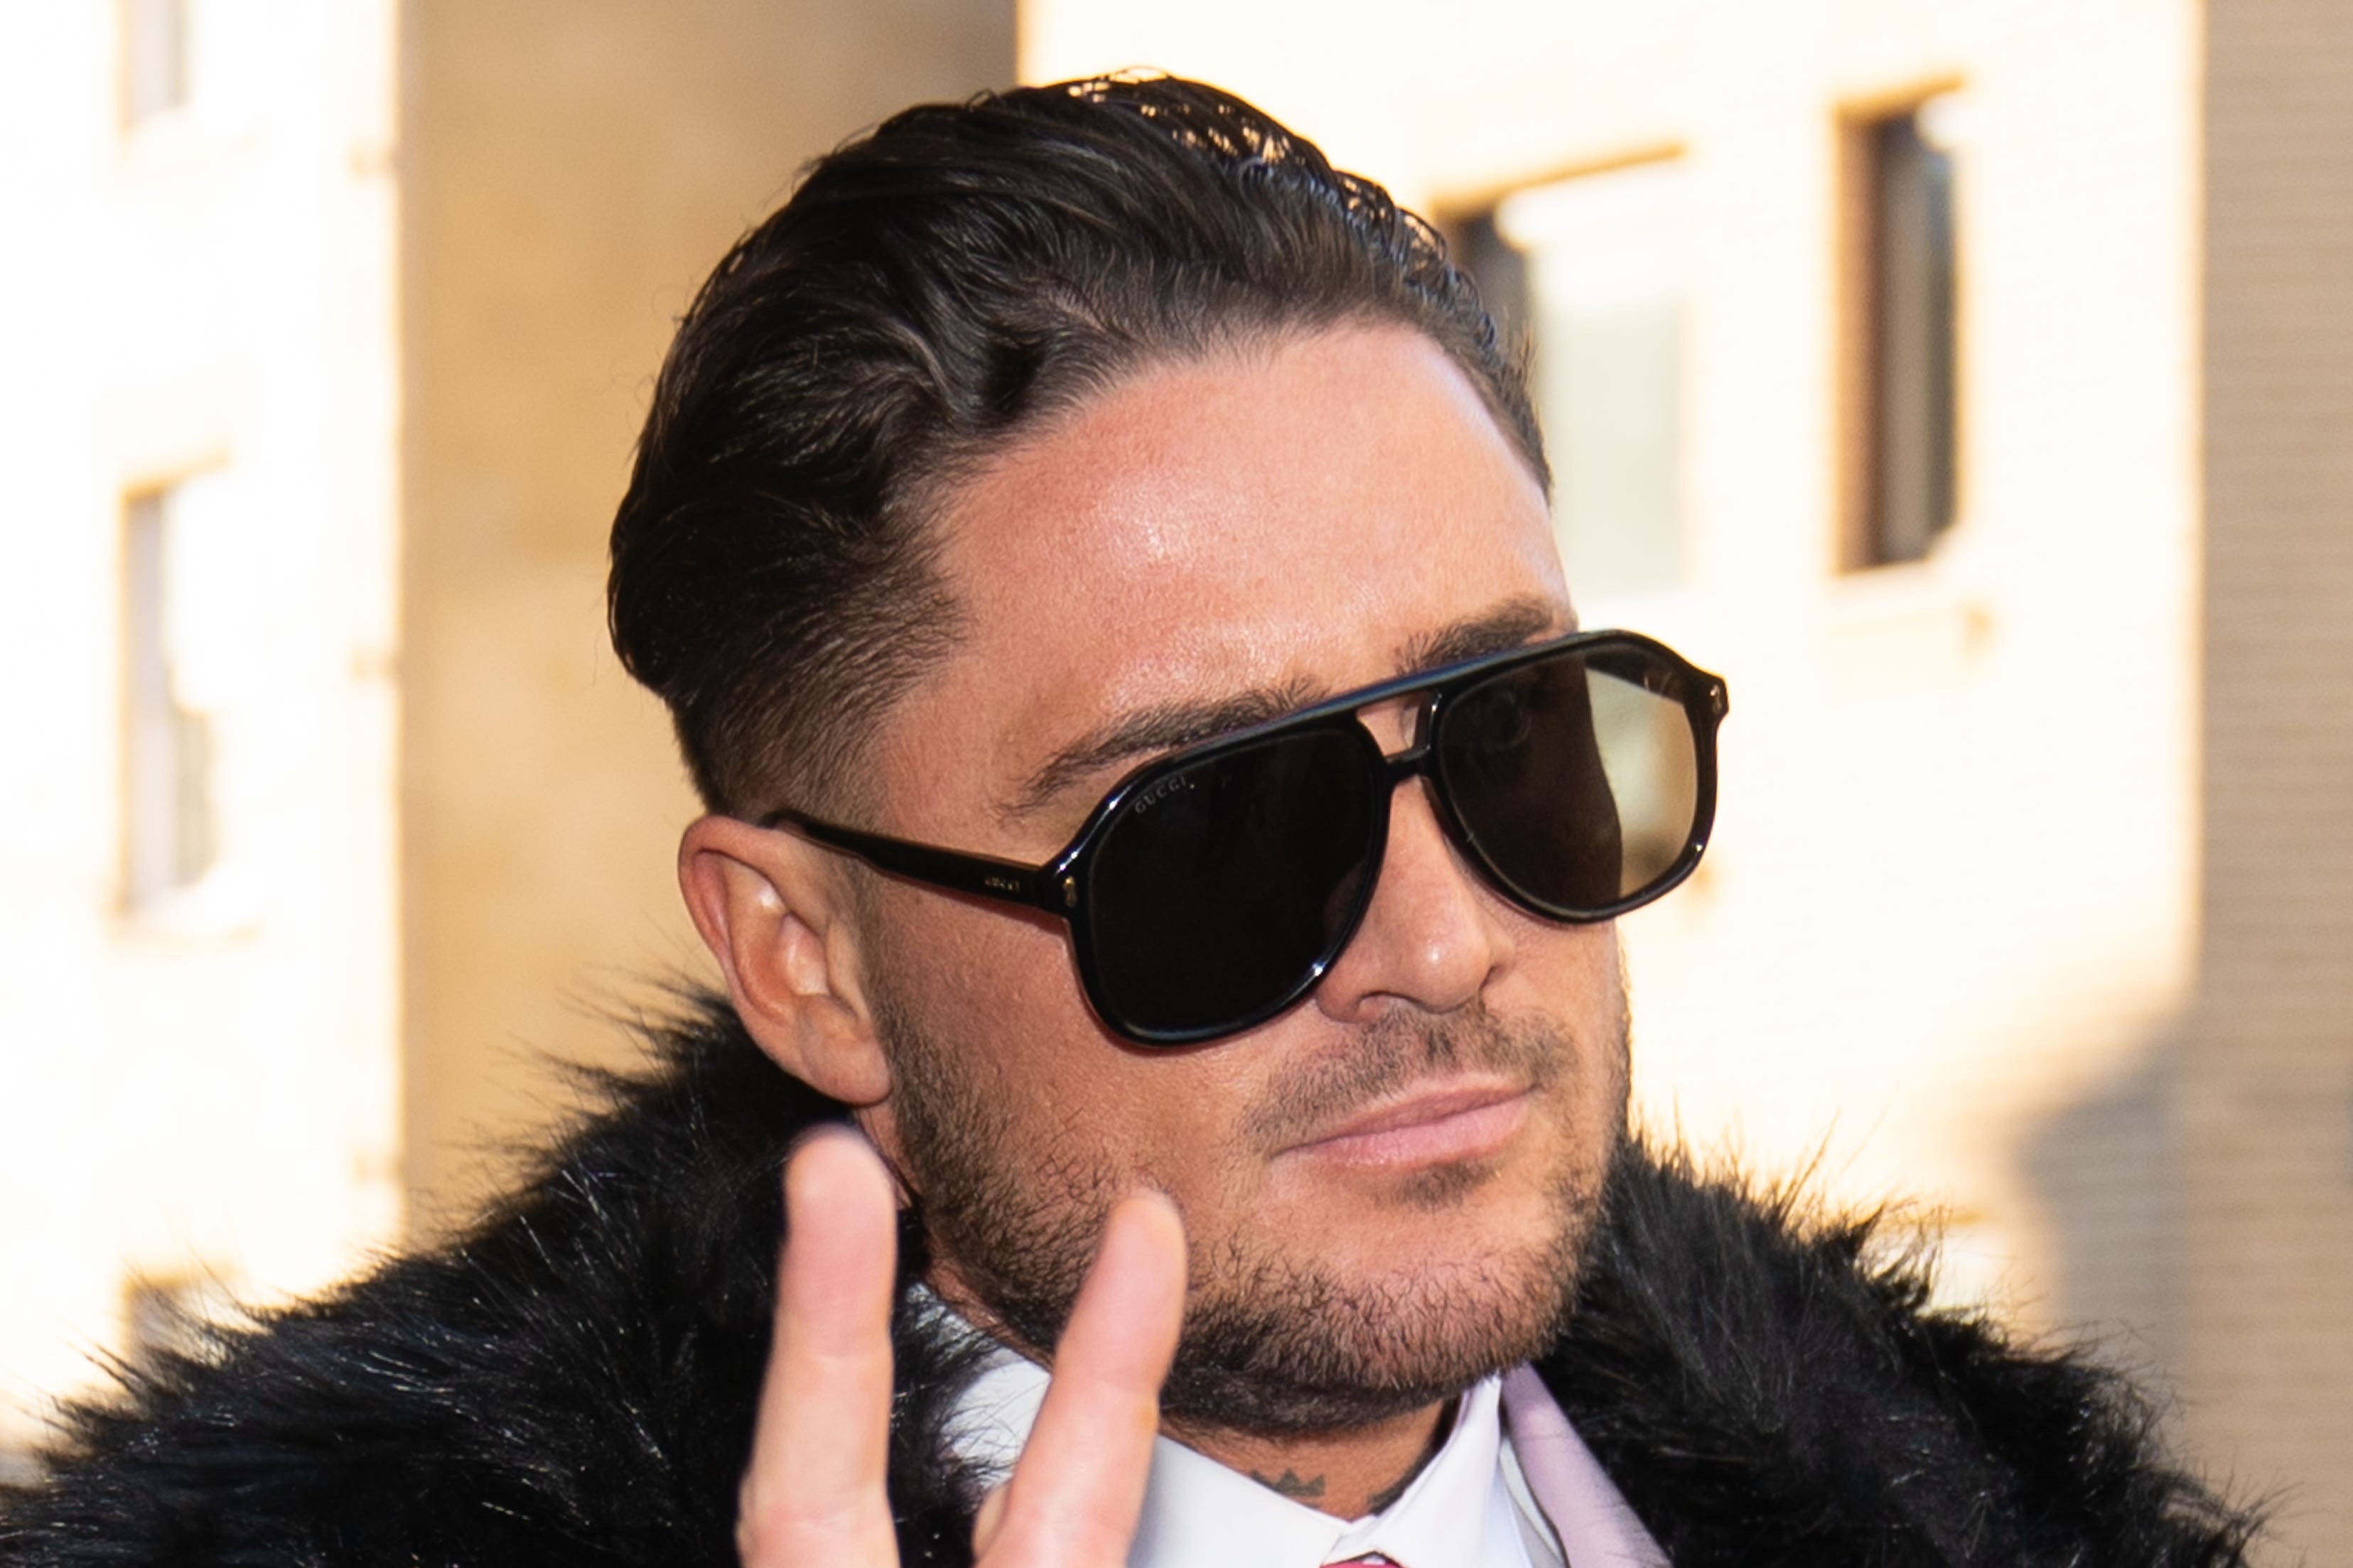 Stephen Bear locked girlfriend out of room while sleeping with someone else The Independent image pic